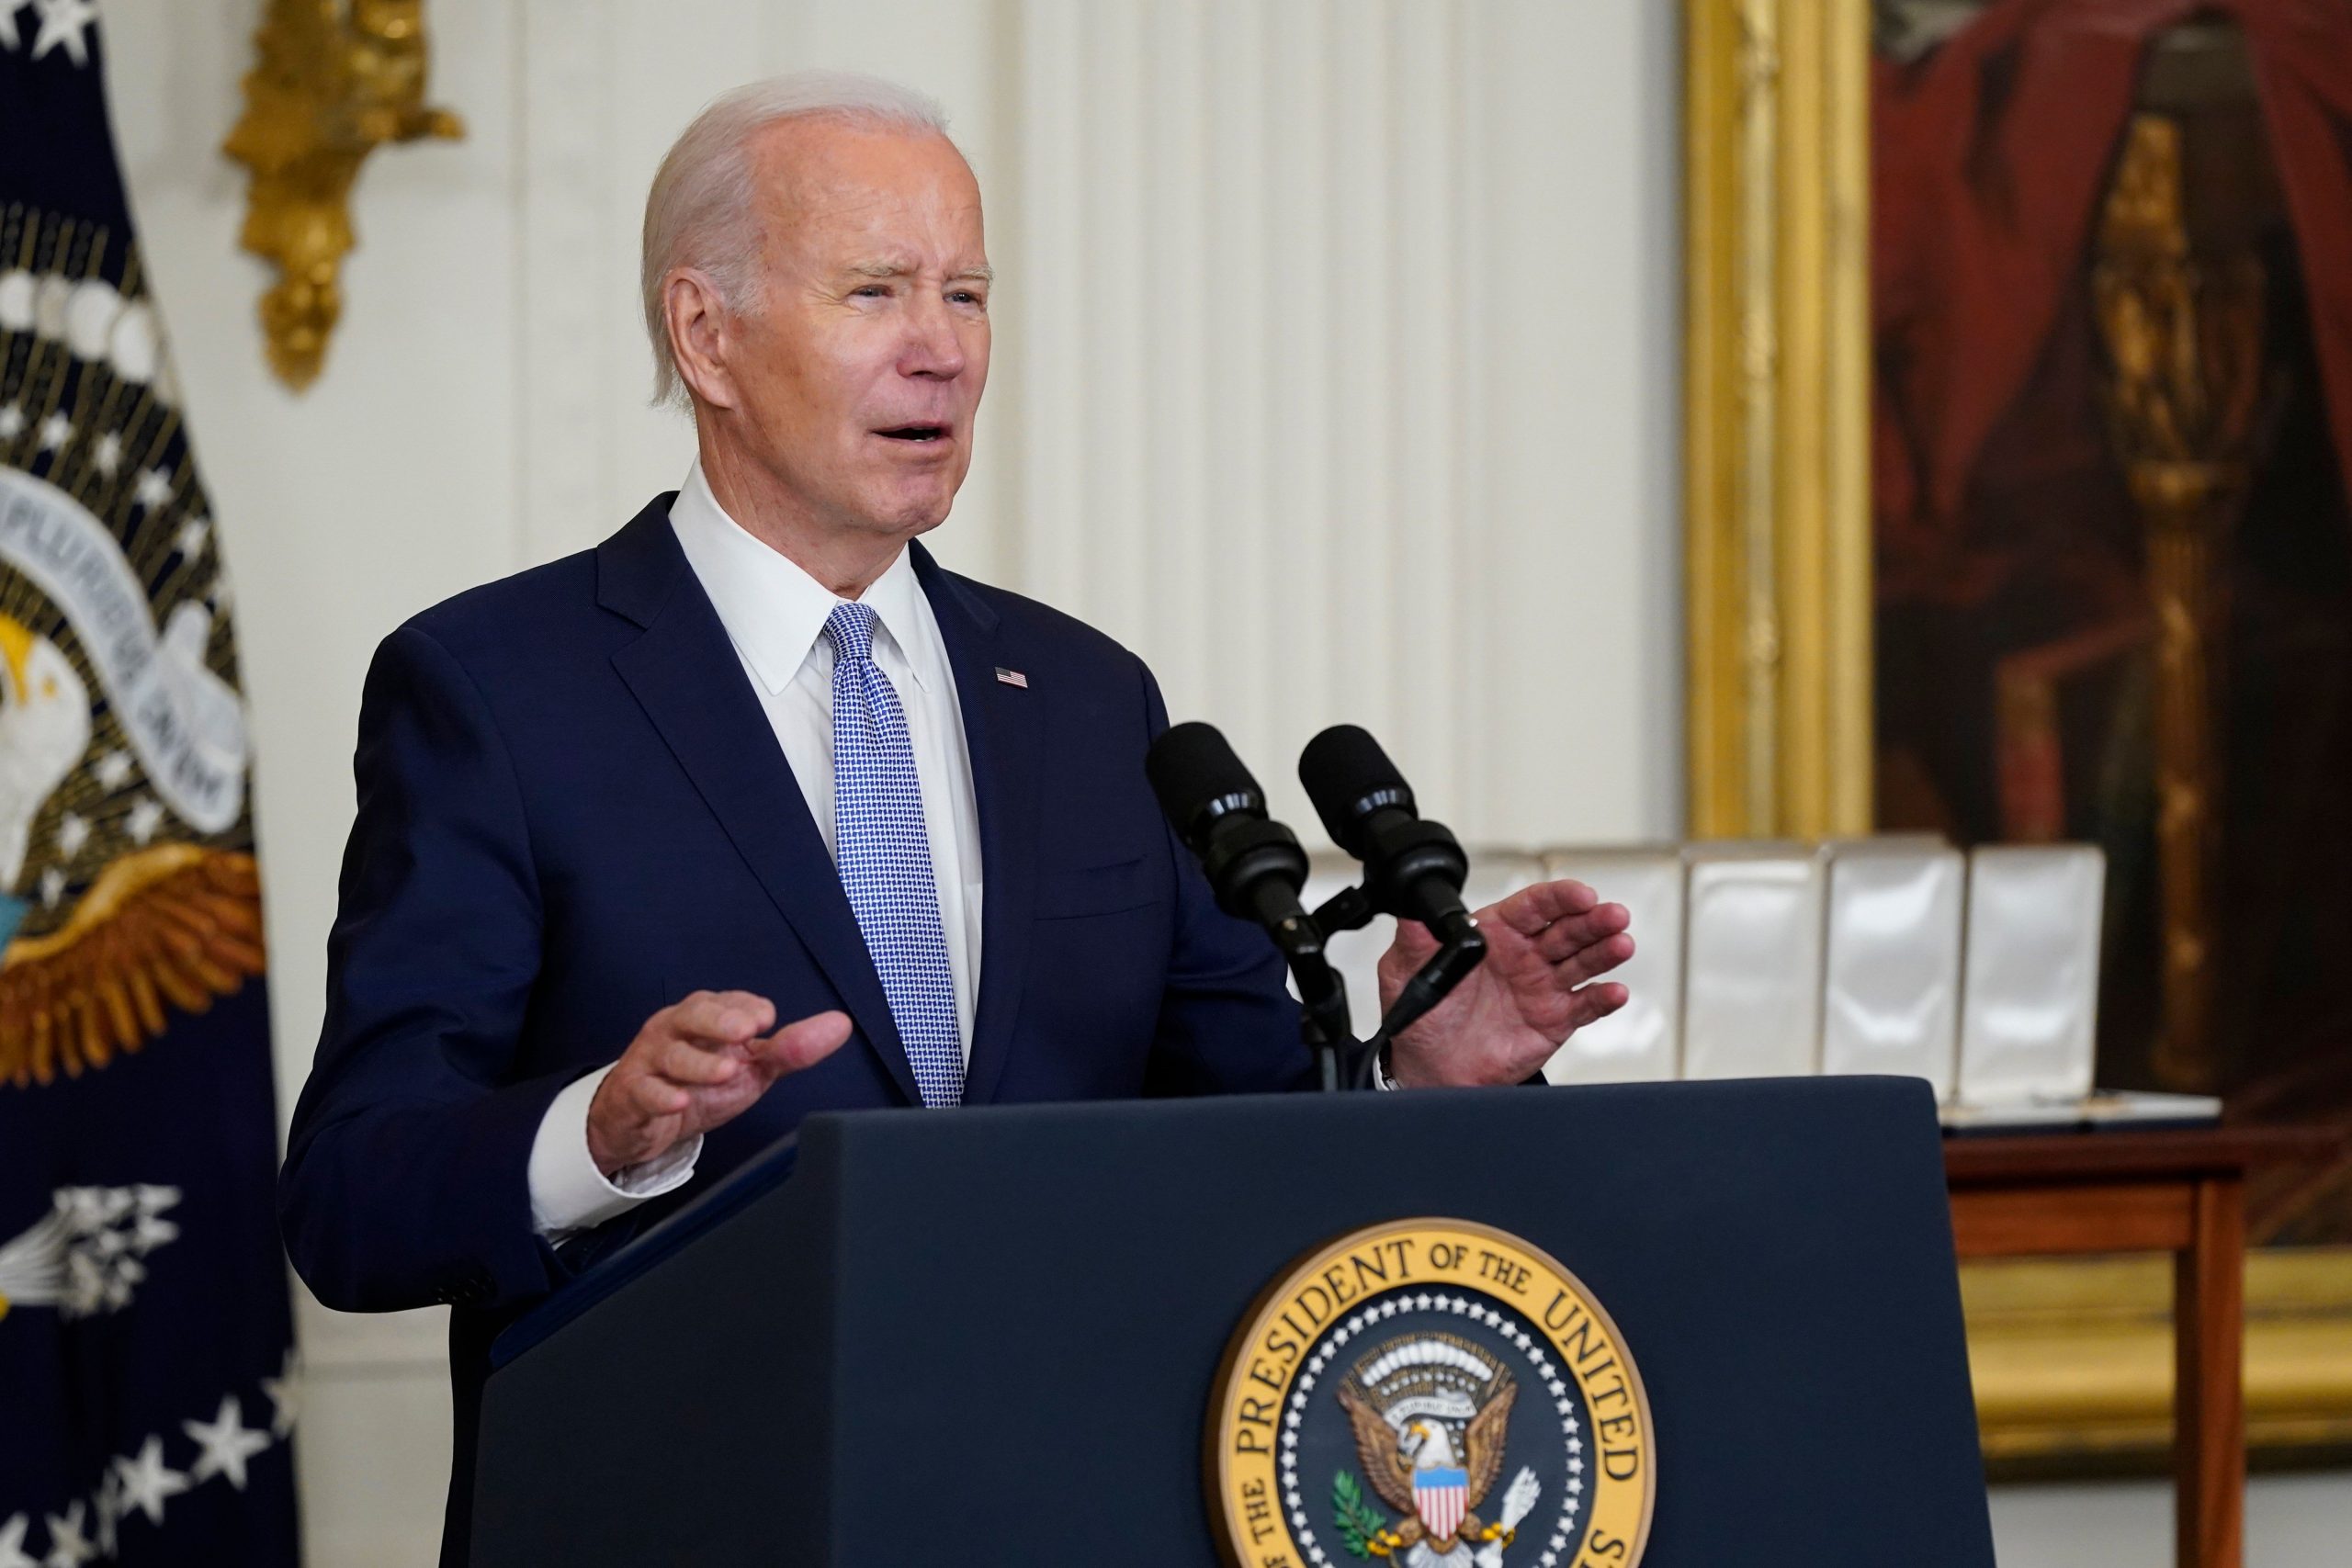 Department of Justice investigating classified documents found at Joe Biden’s private office from time as VP